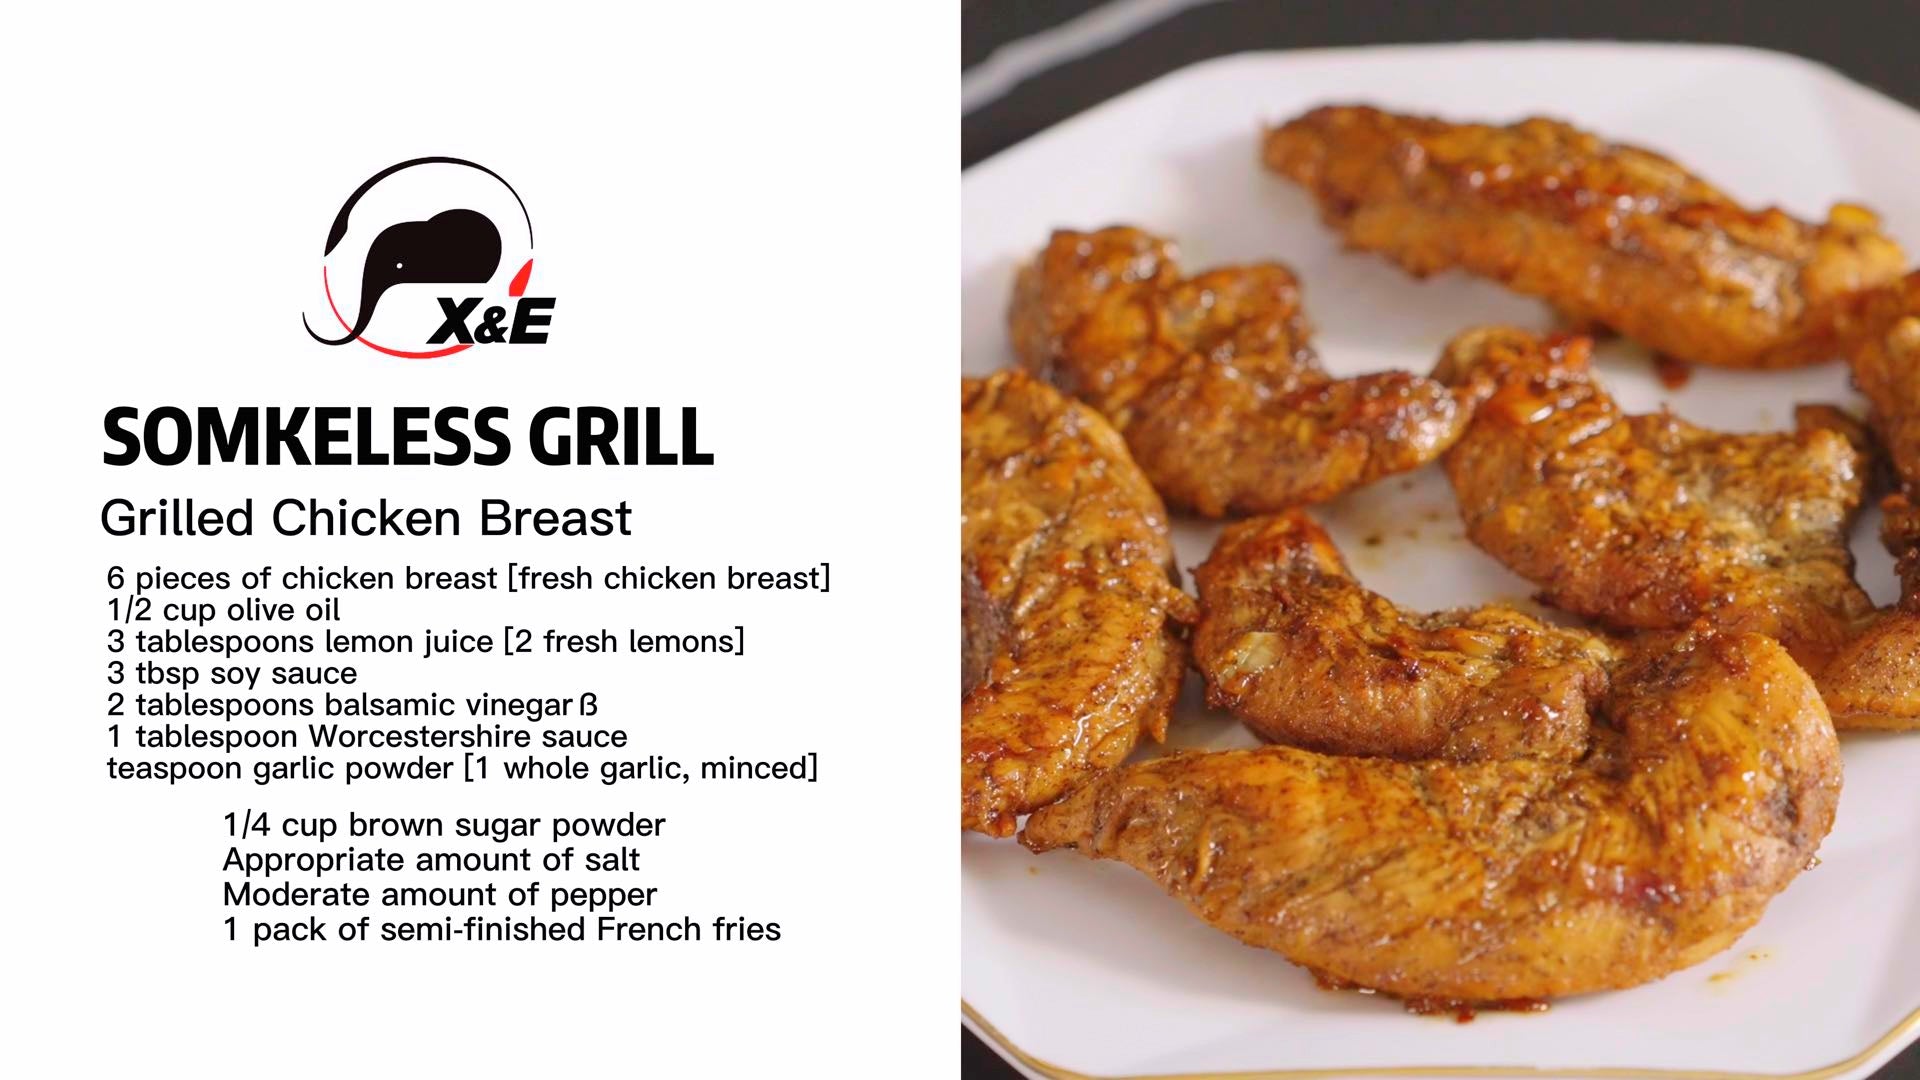 The X&E Smokeless Grill is the perfect tool for achieving tender, juicy grilled chicken breasts in the comfort of your own kitchen.